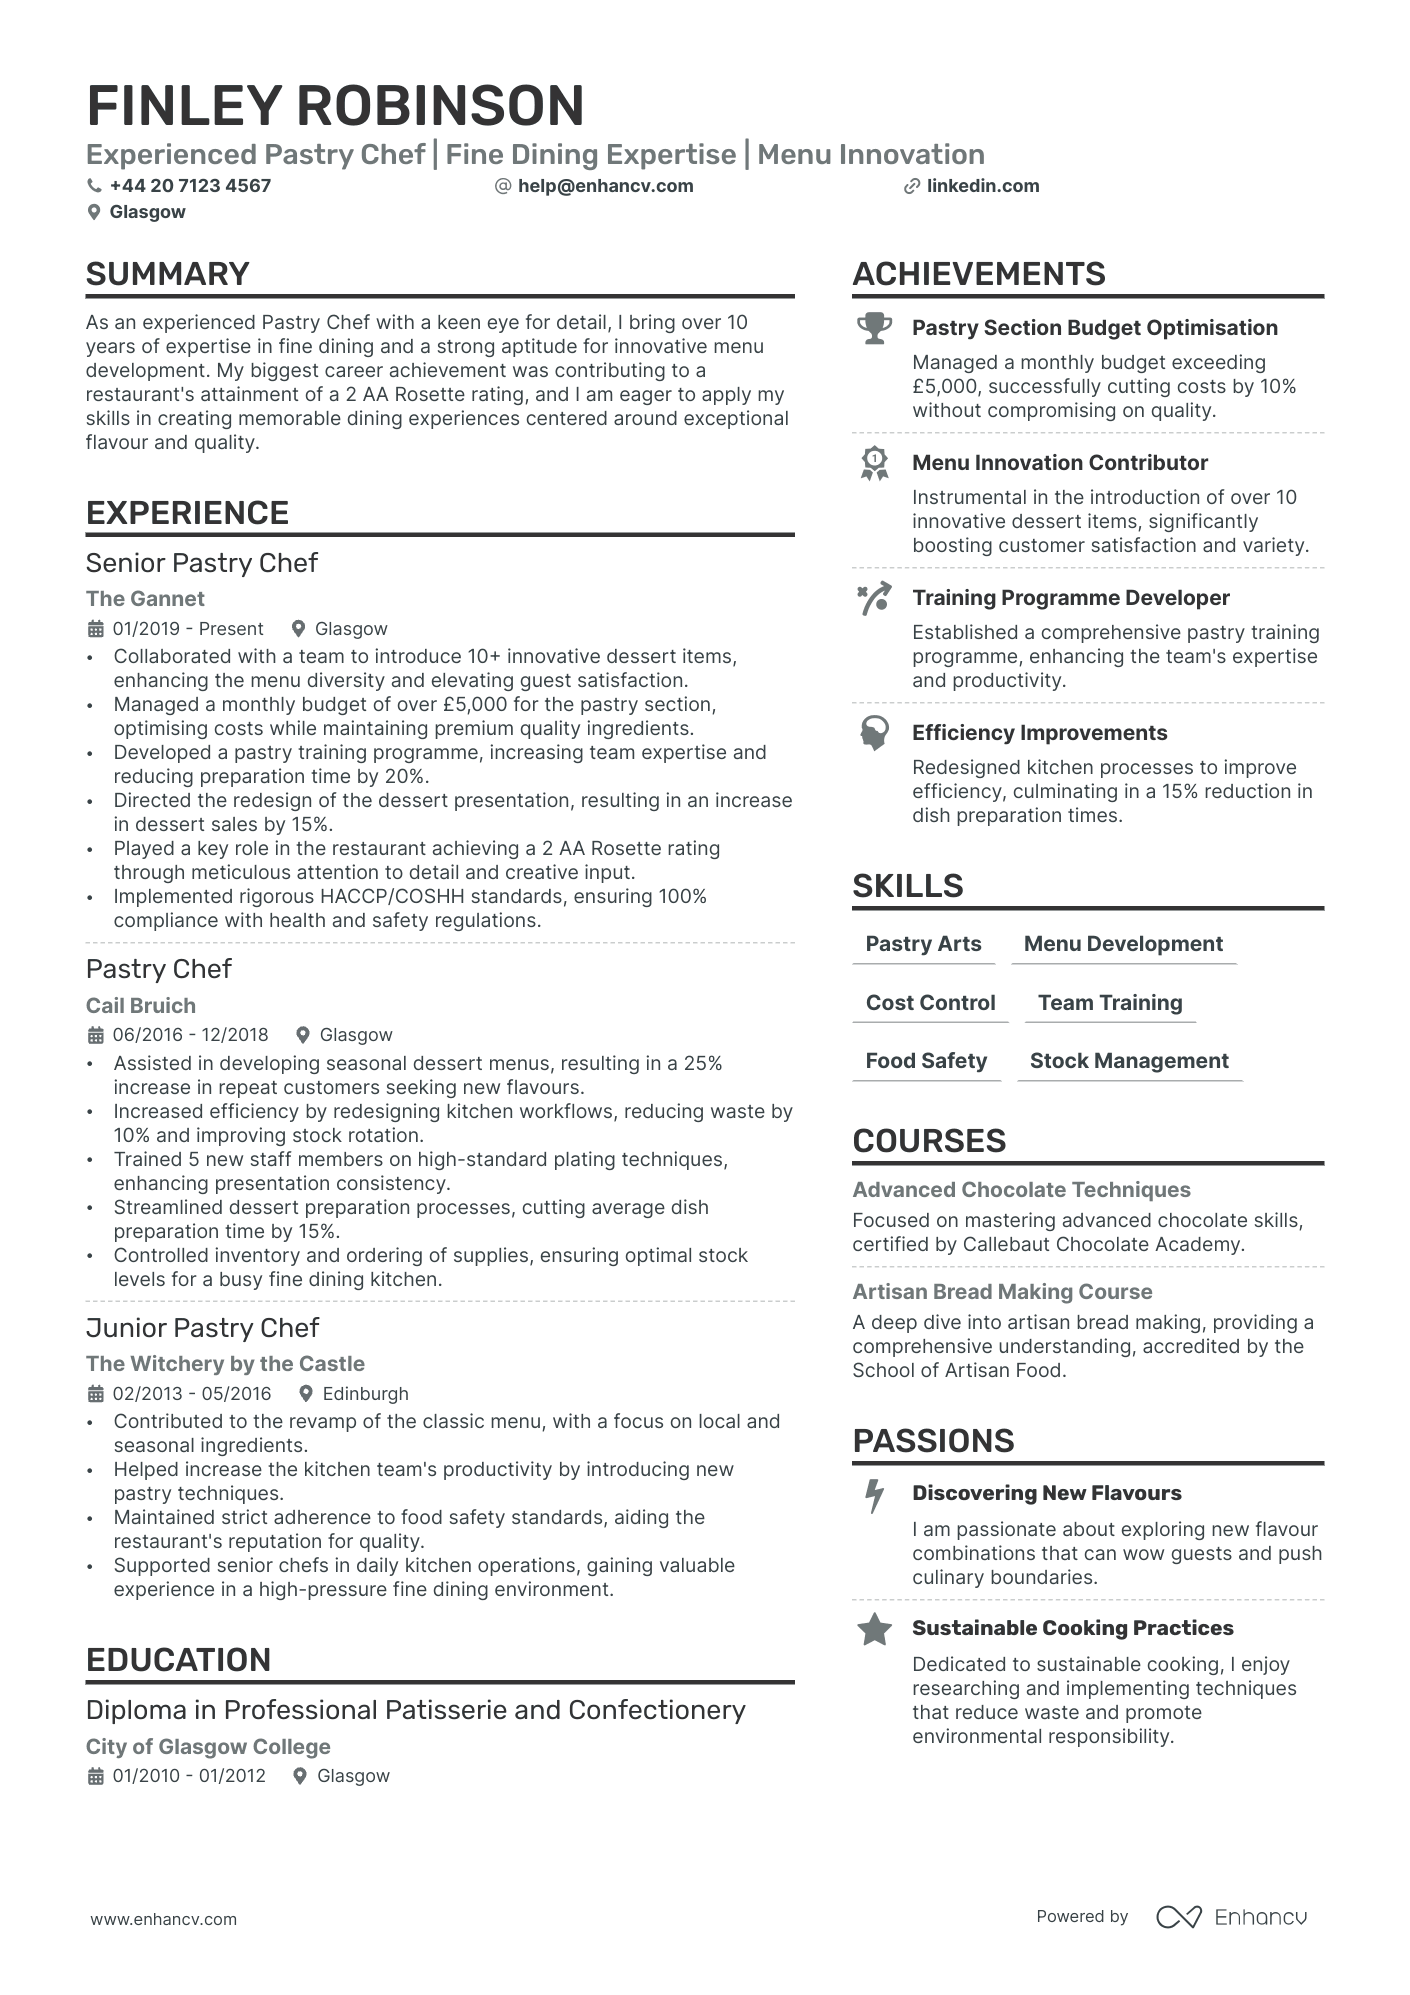 Pastry Chef cv example